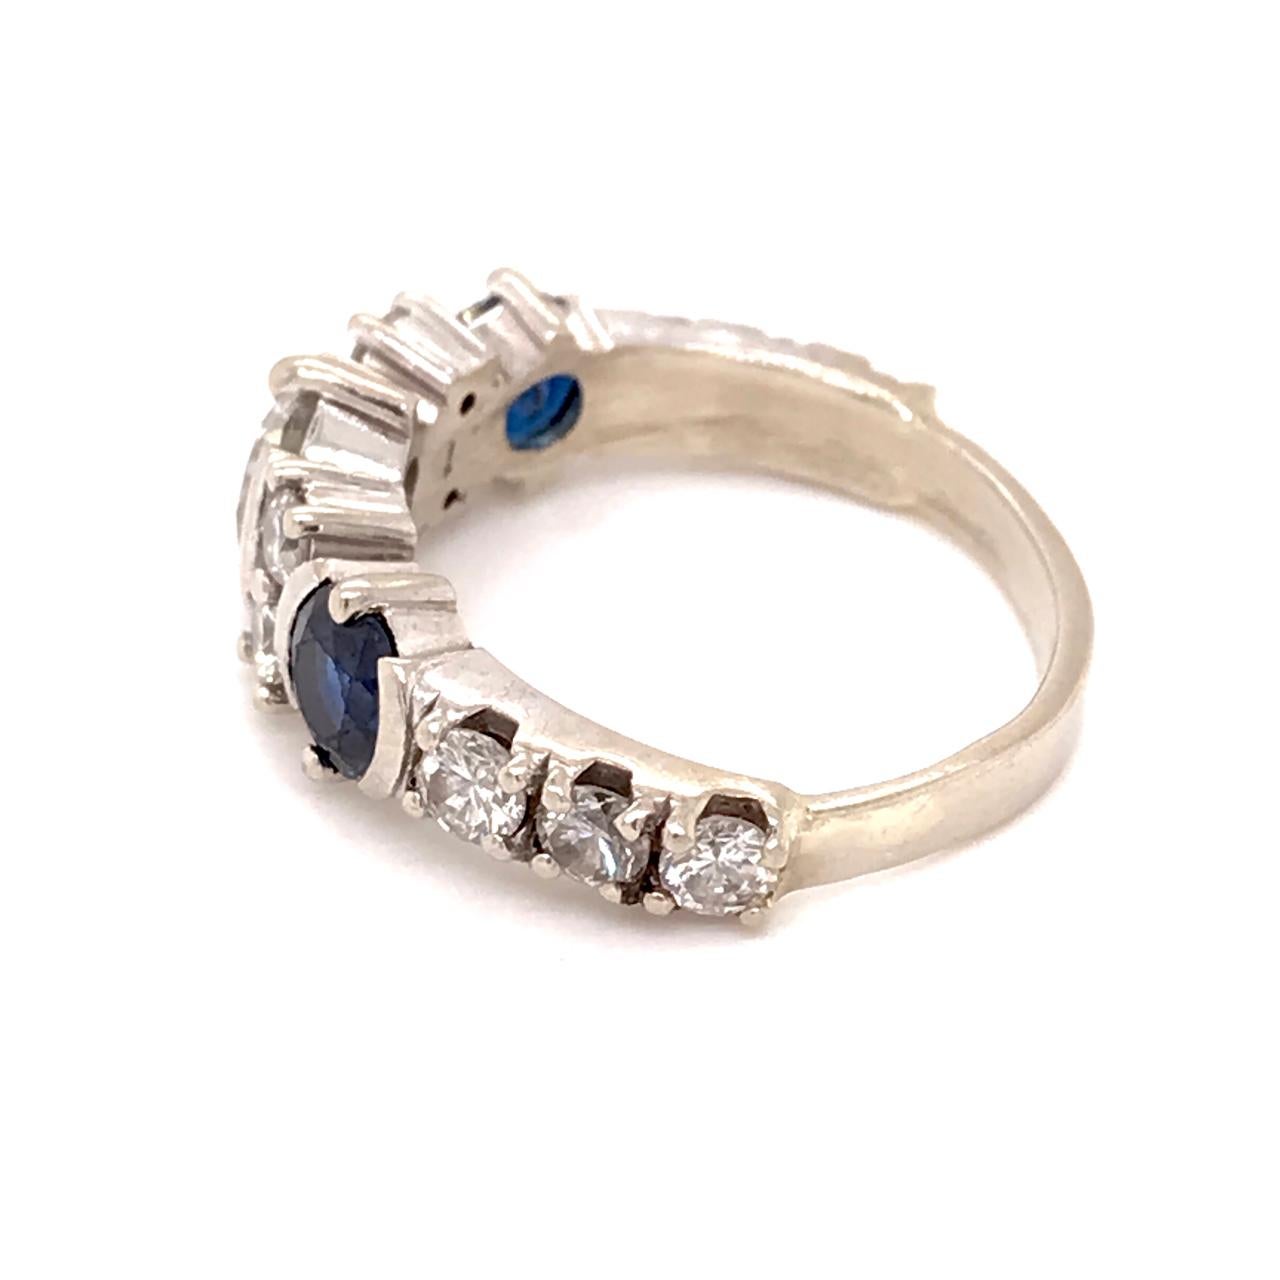 Vintage 14k White Gold, Diamond, & Sapphire Art Deco Style Cocktail Ring For Sale 4